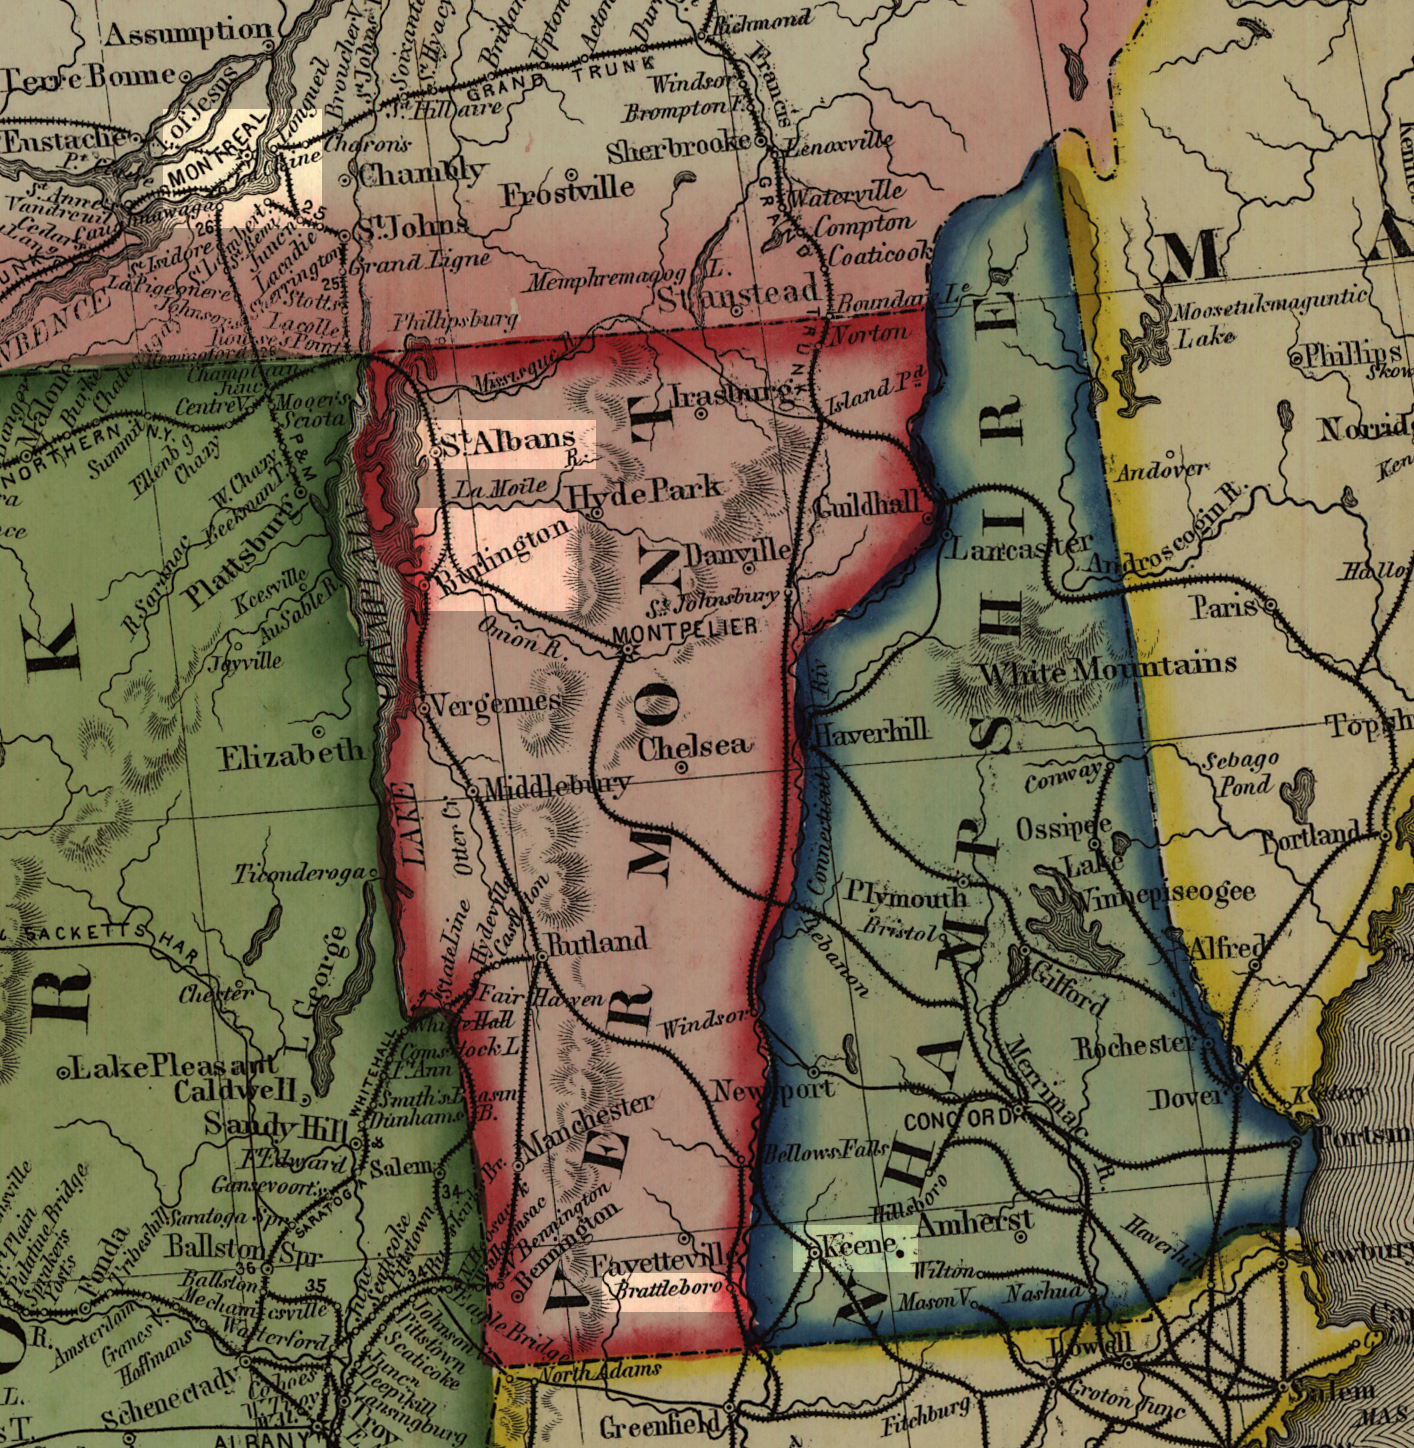 Map of New Hampshire, Vermont, and Canada, with the cities of Keene, Brattleboro, Burlington, St. Albans, and Montreal highlighted.